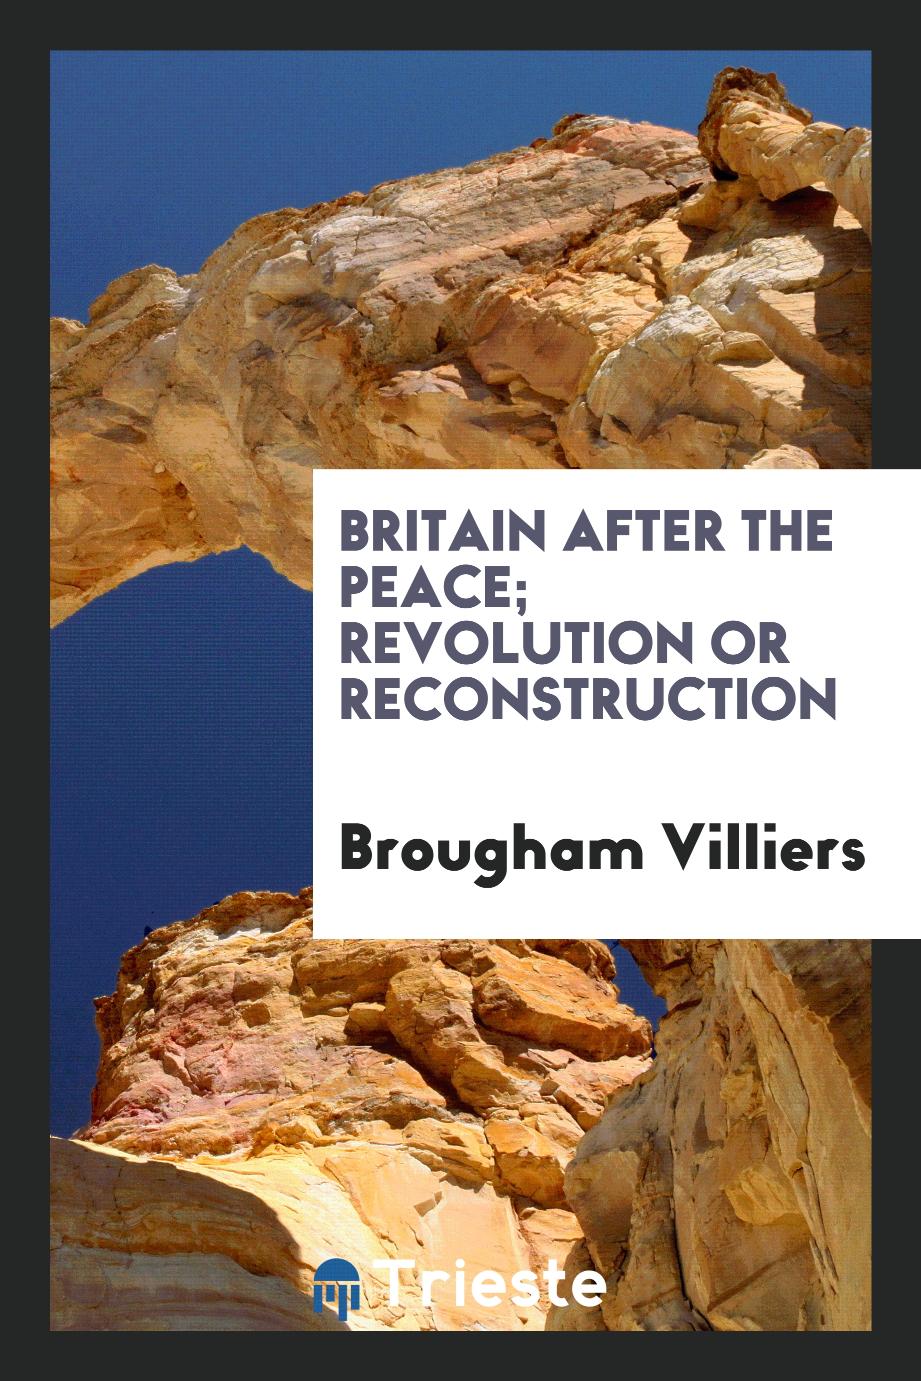 Britain after the peace; revolution or reconstruction